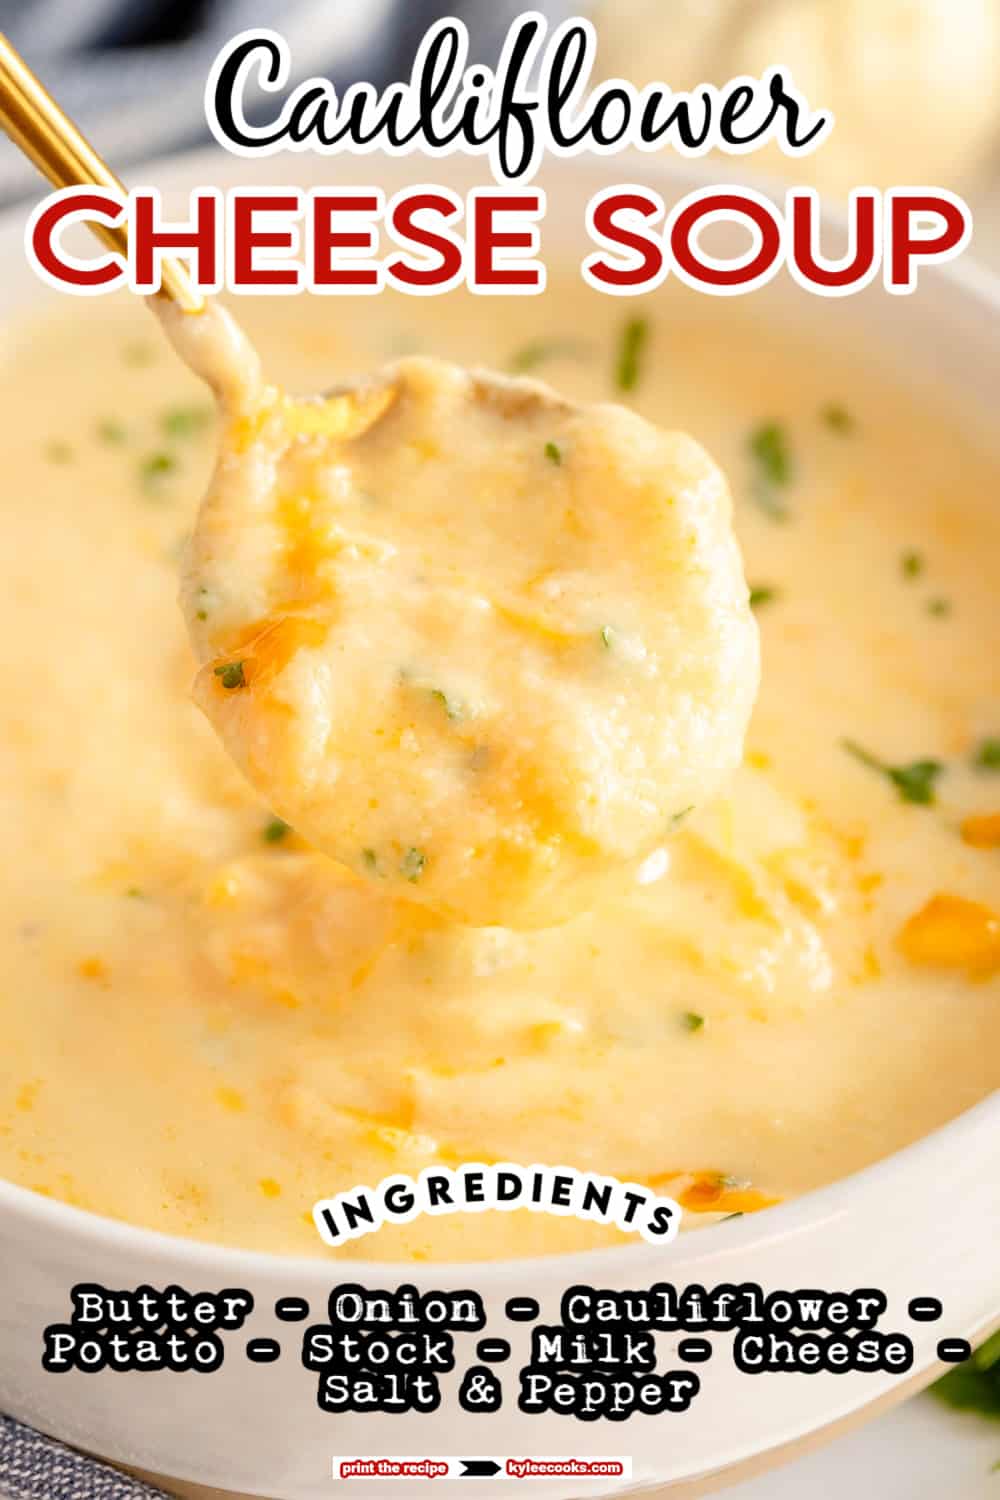 cauliflower cheese soup with recipe name overlaid in text.